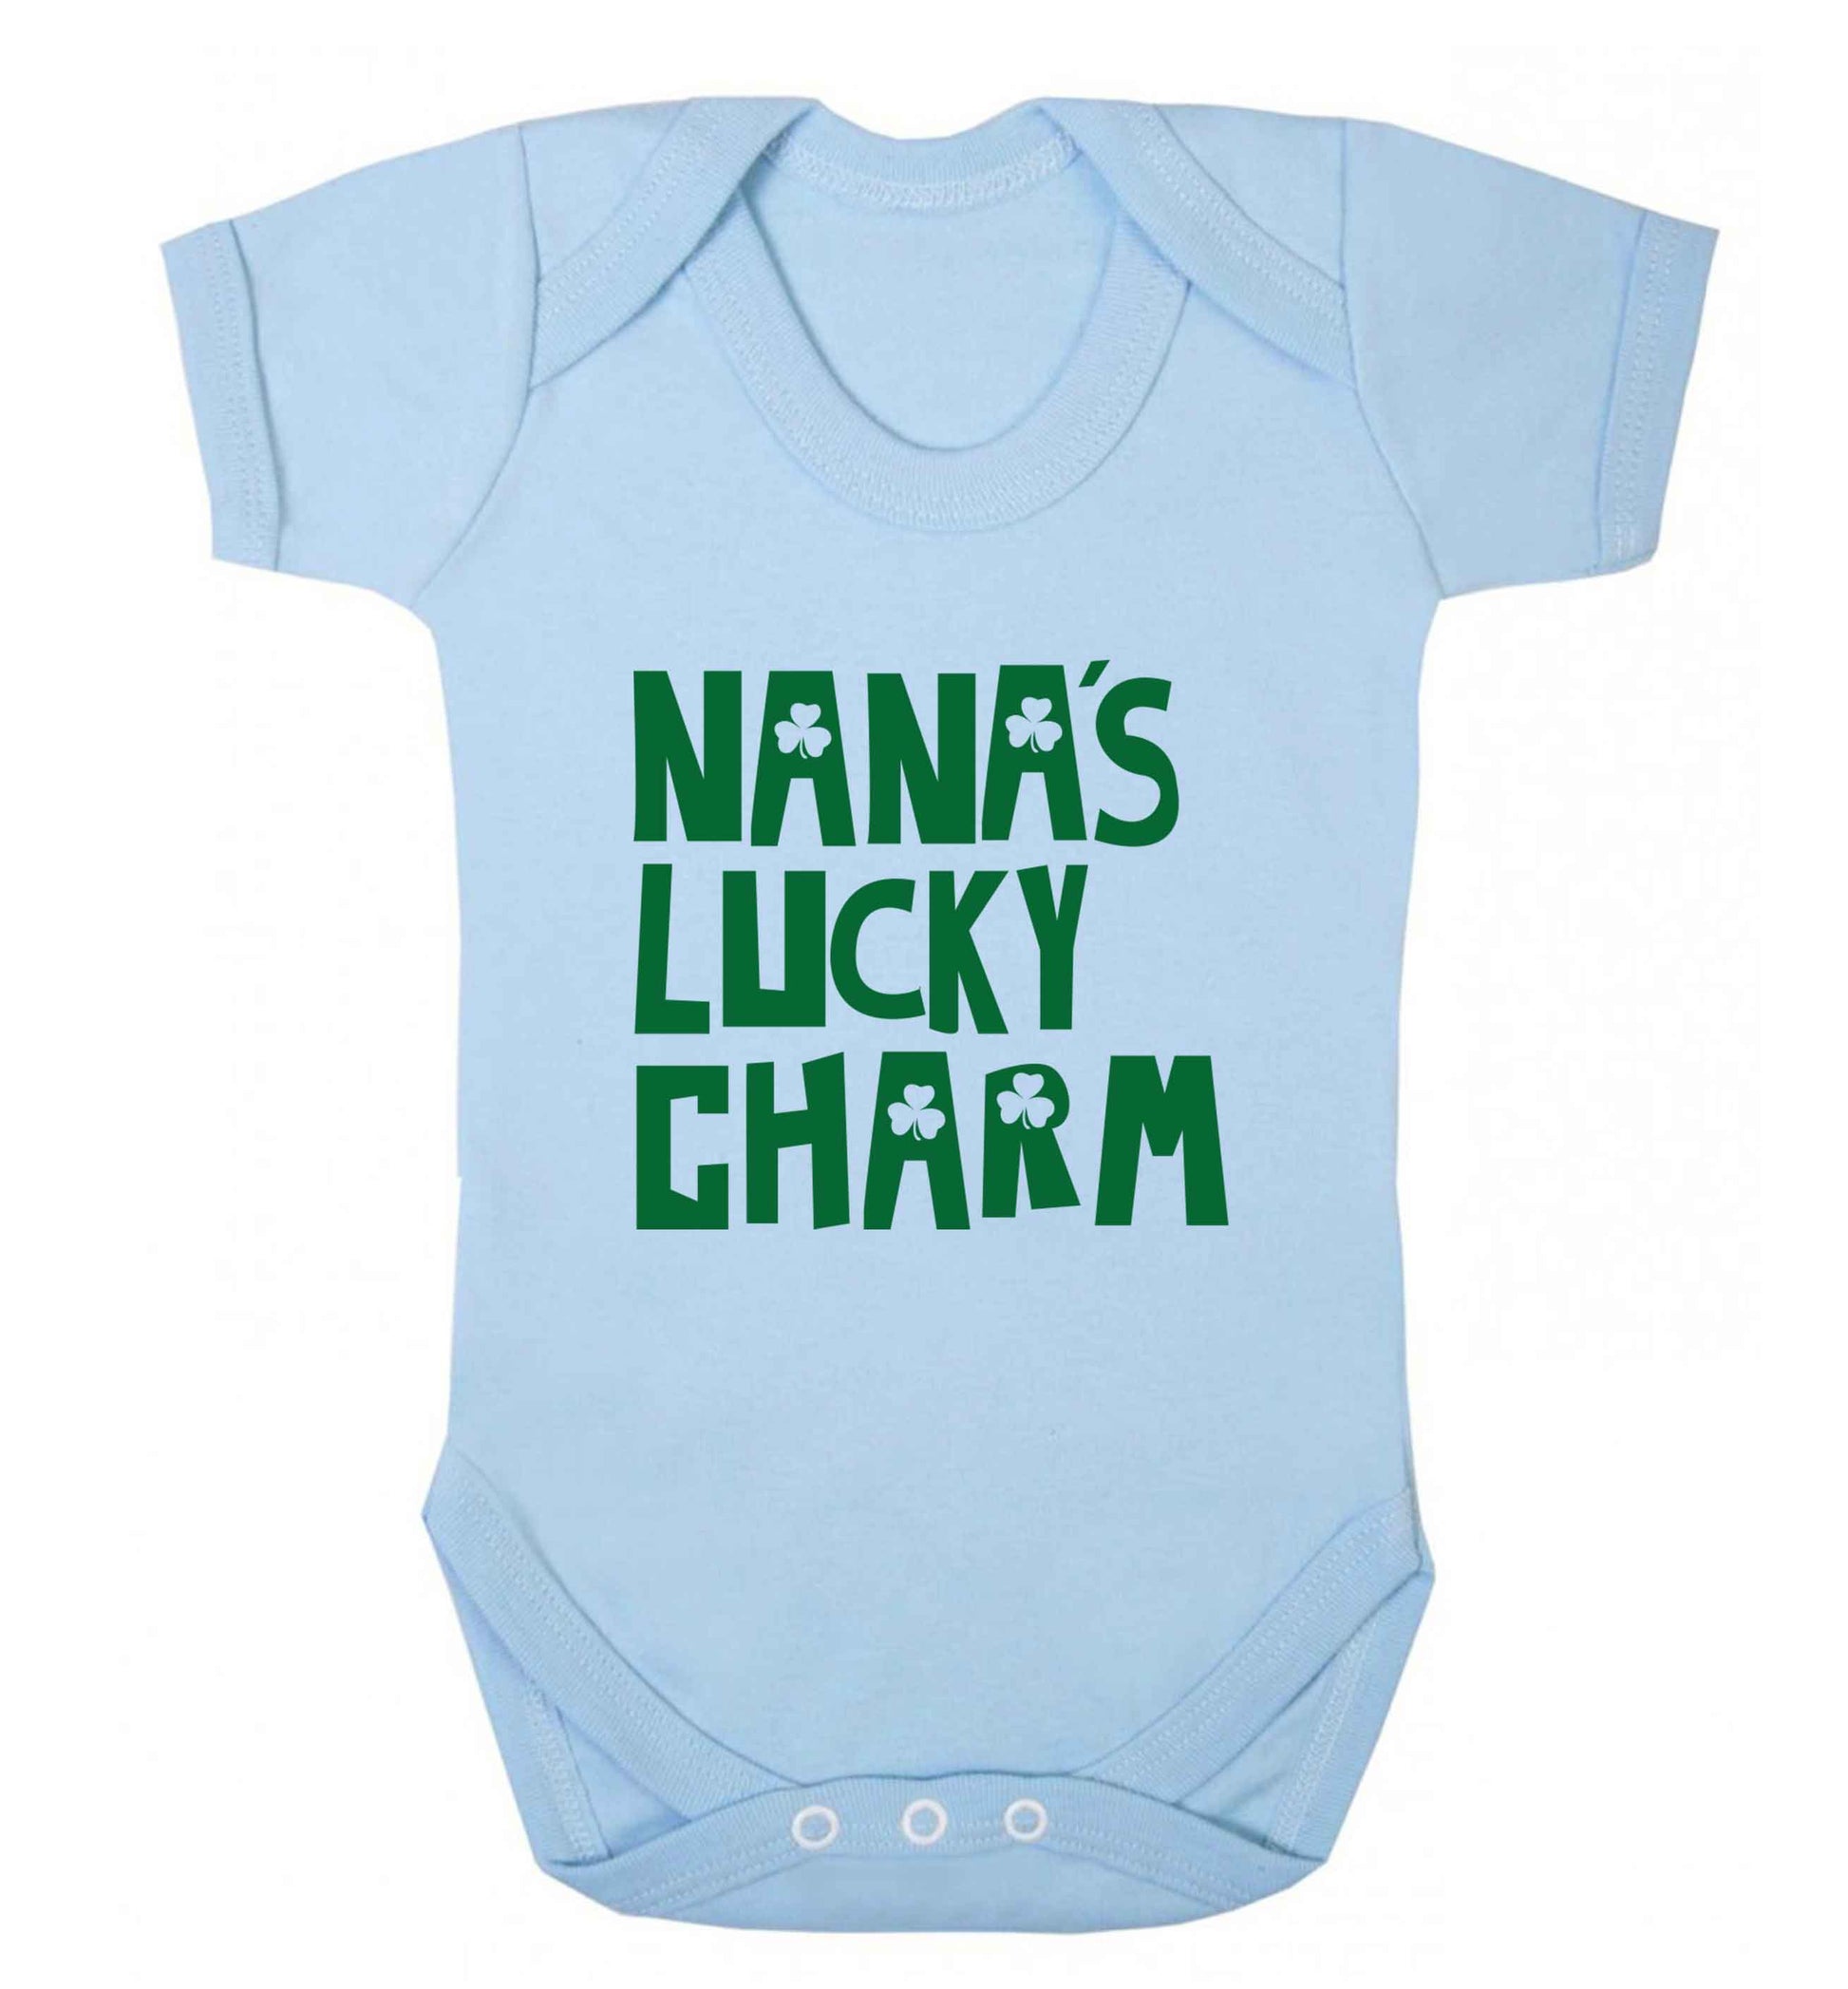 Nana's lucky charm baby vest pale blue 18-24 months